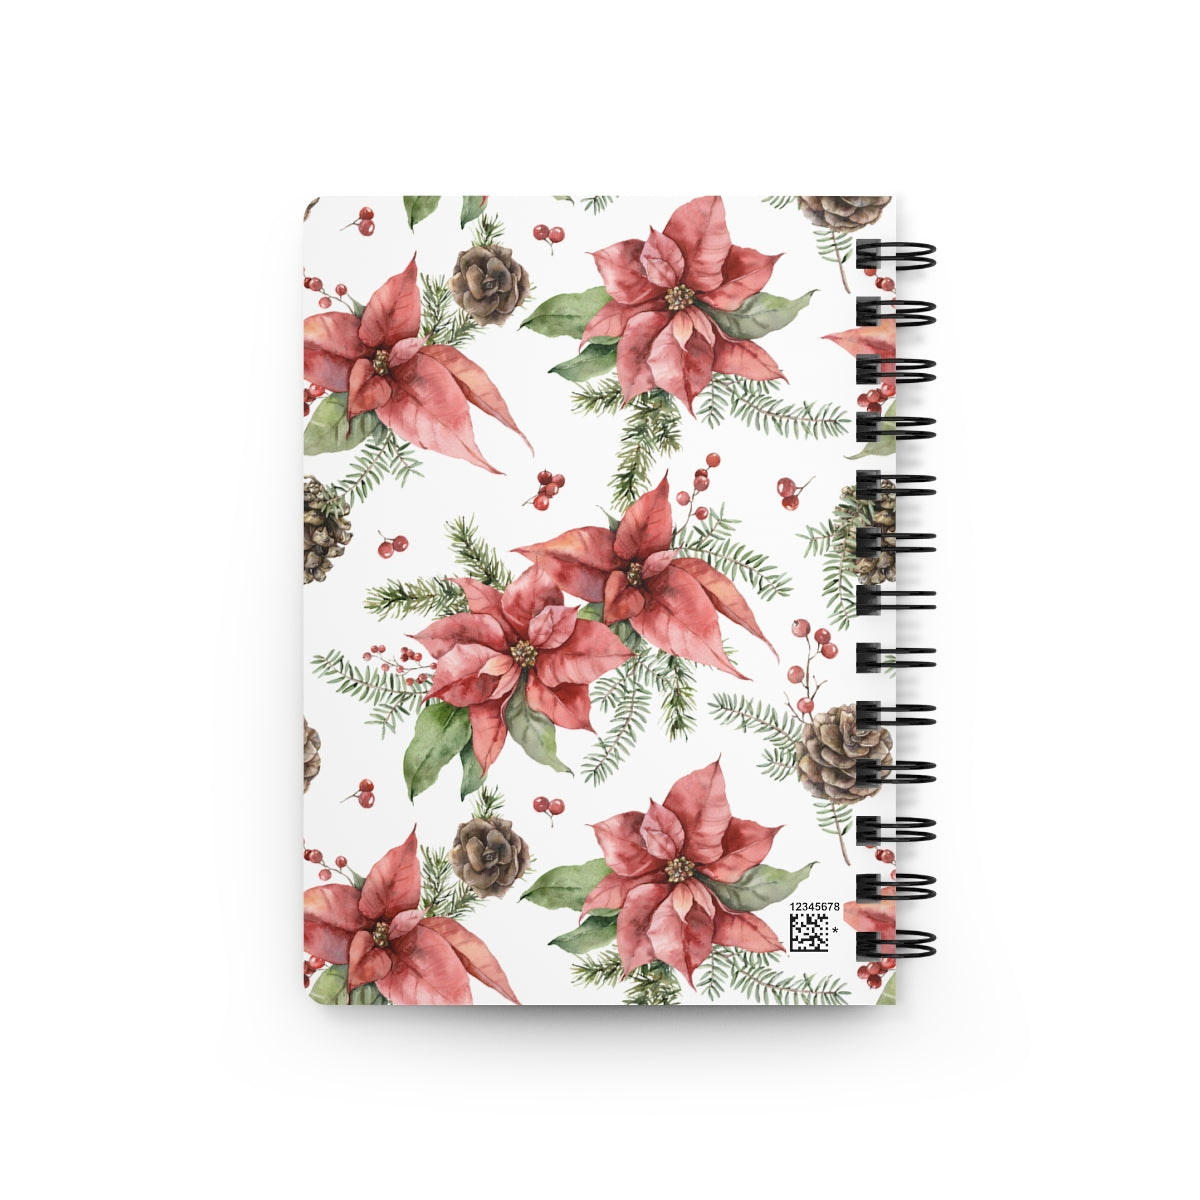 Poinsettia and Pine Cones Spiral Bound Journal